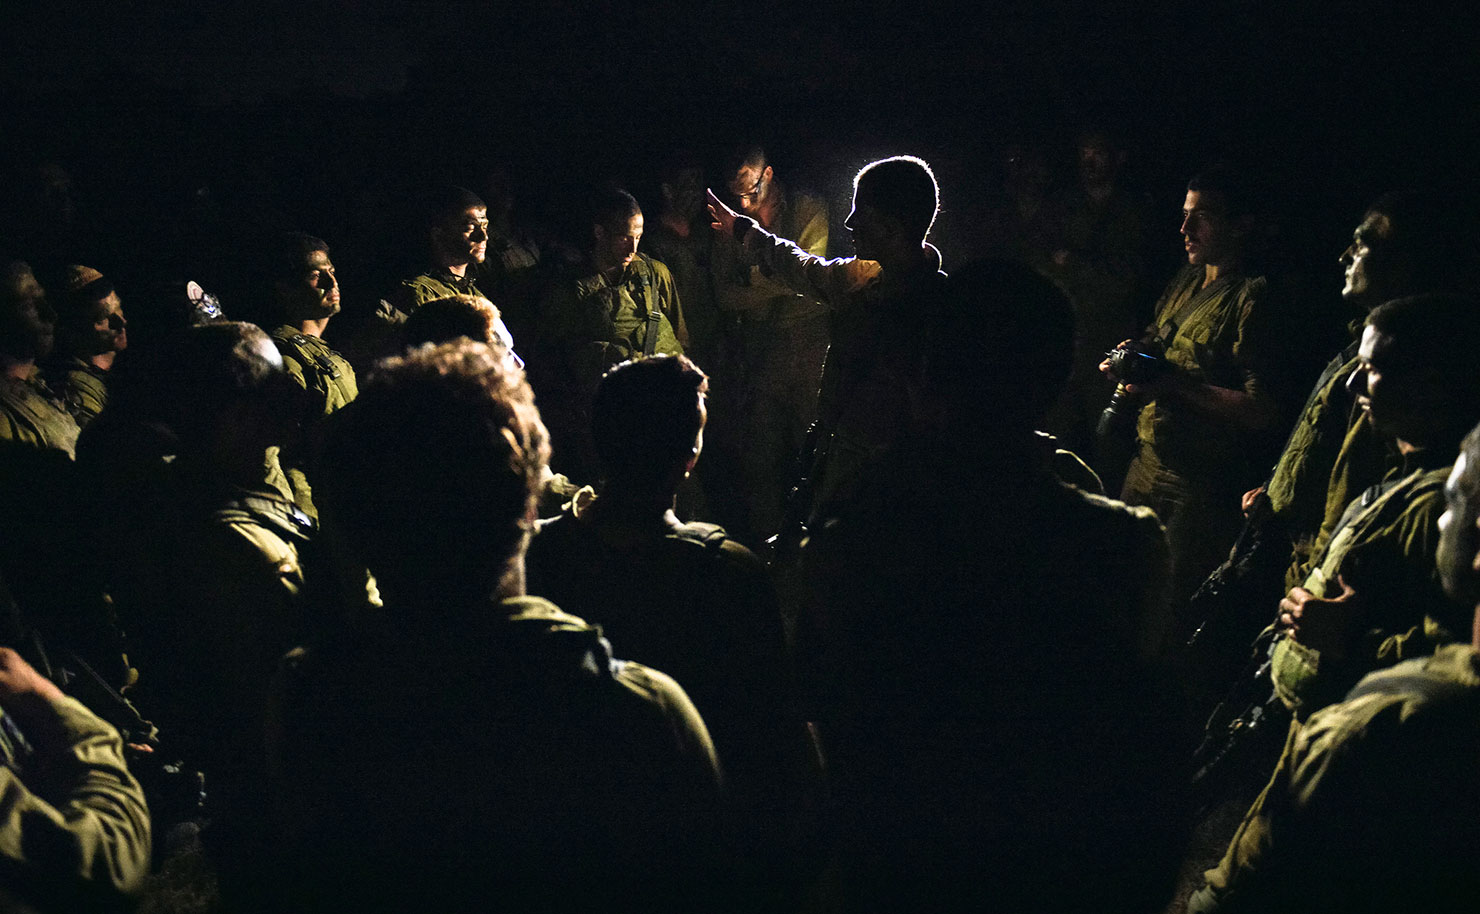 Israeli Defence Force soldiers prepare to enter Gaza during Operation Protective Edge in 2014, an assault which killed more than 2,200 Palestinians - most of them civilians - and 66 Israeli soldiers, plus six Israeli civilians. (IMAGE: IDF, Flickr)